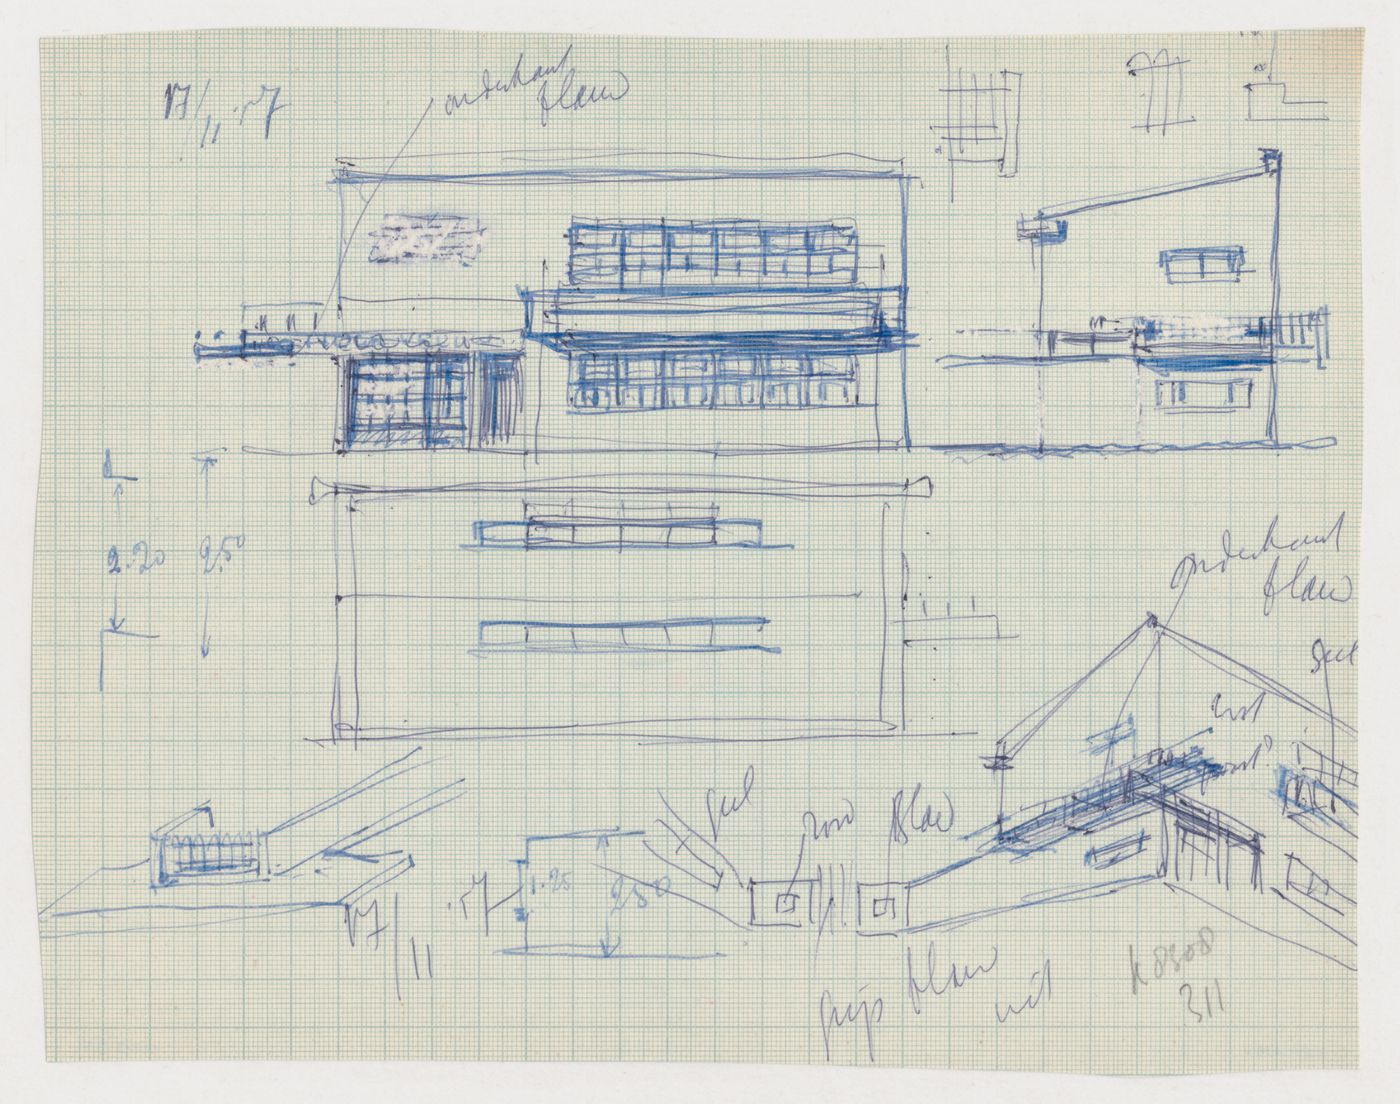 Sketch elevations and sketch perspectives, possibly for De Hoge Veluwe park-keeper's house, including details possibly for a balcony, Otterloo, Netherlands